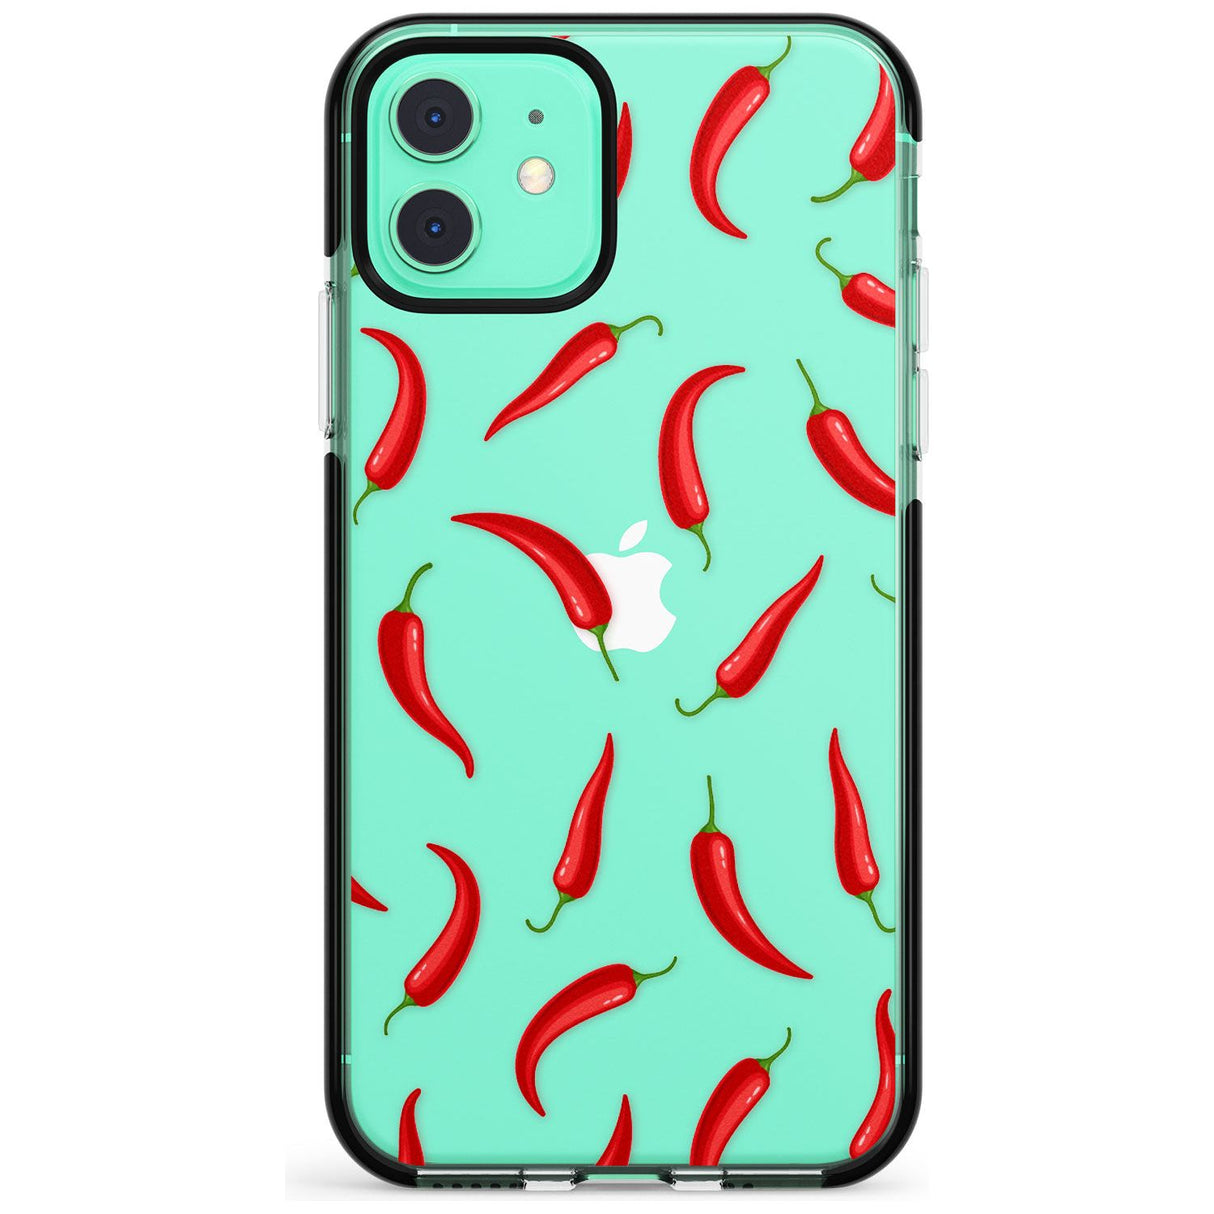 Chilly Pattern Black Impact Phone Case for iPhone 11 Pro Max